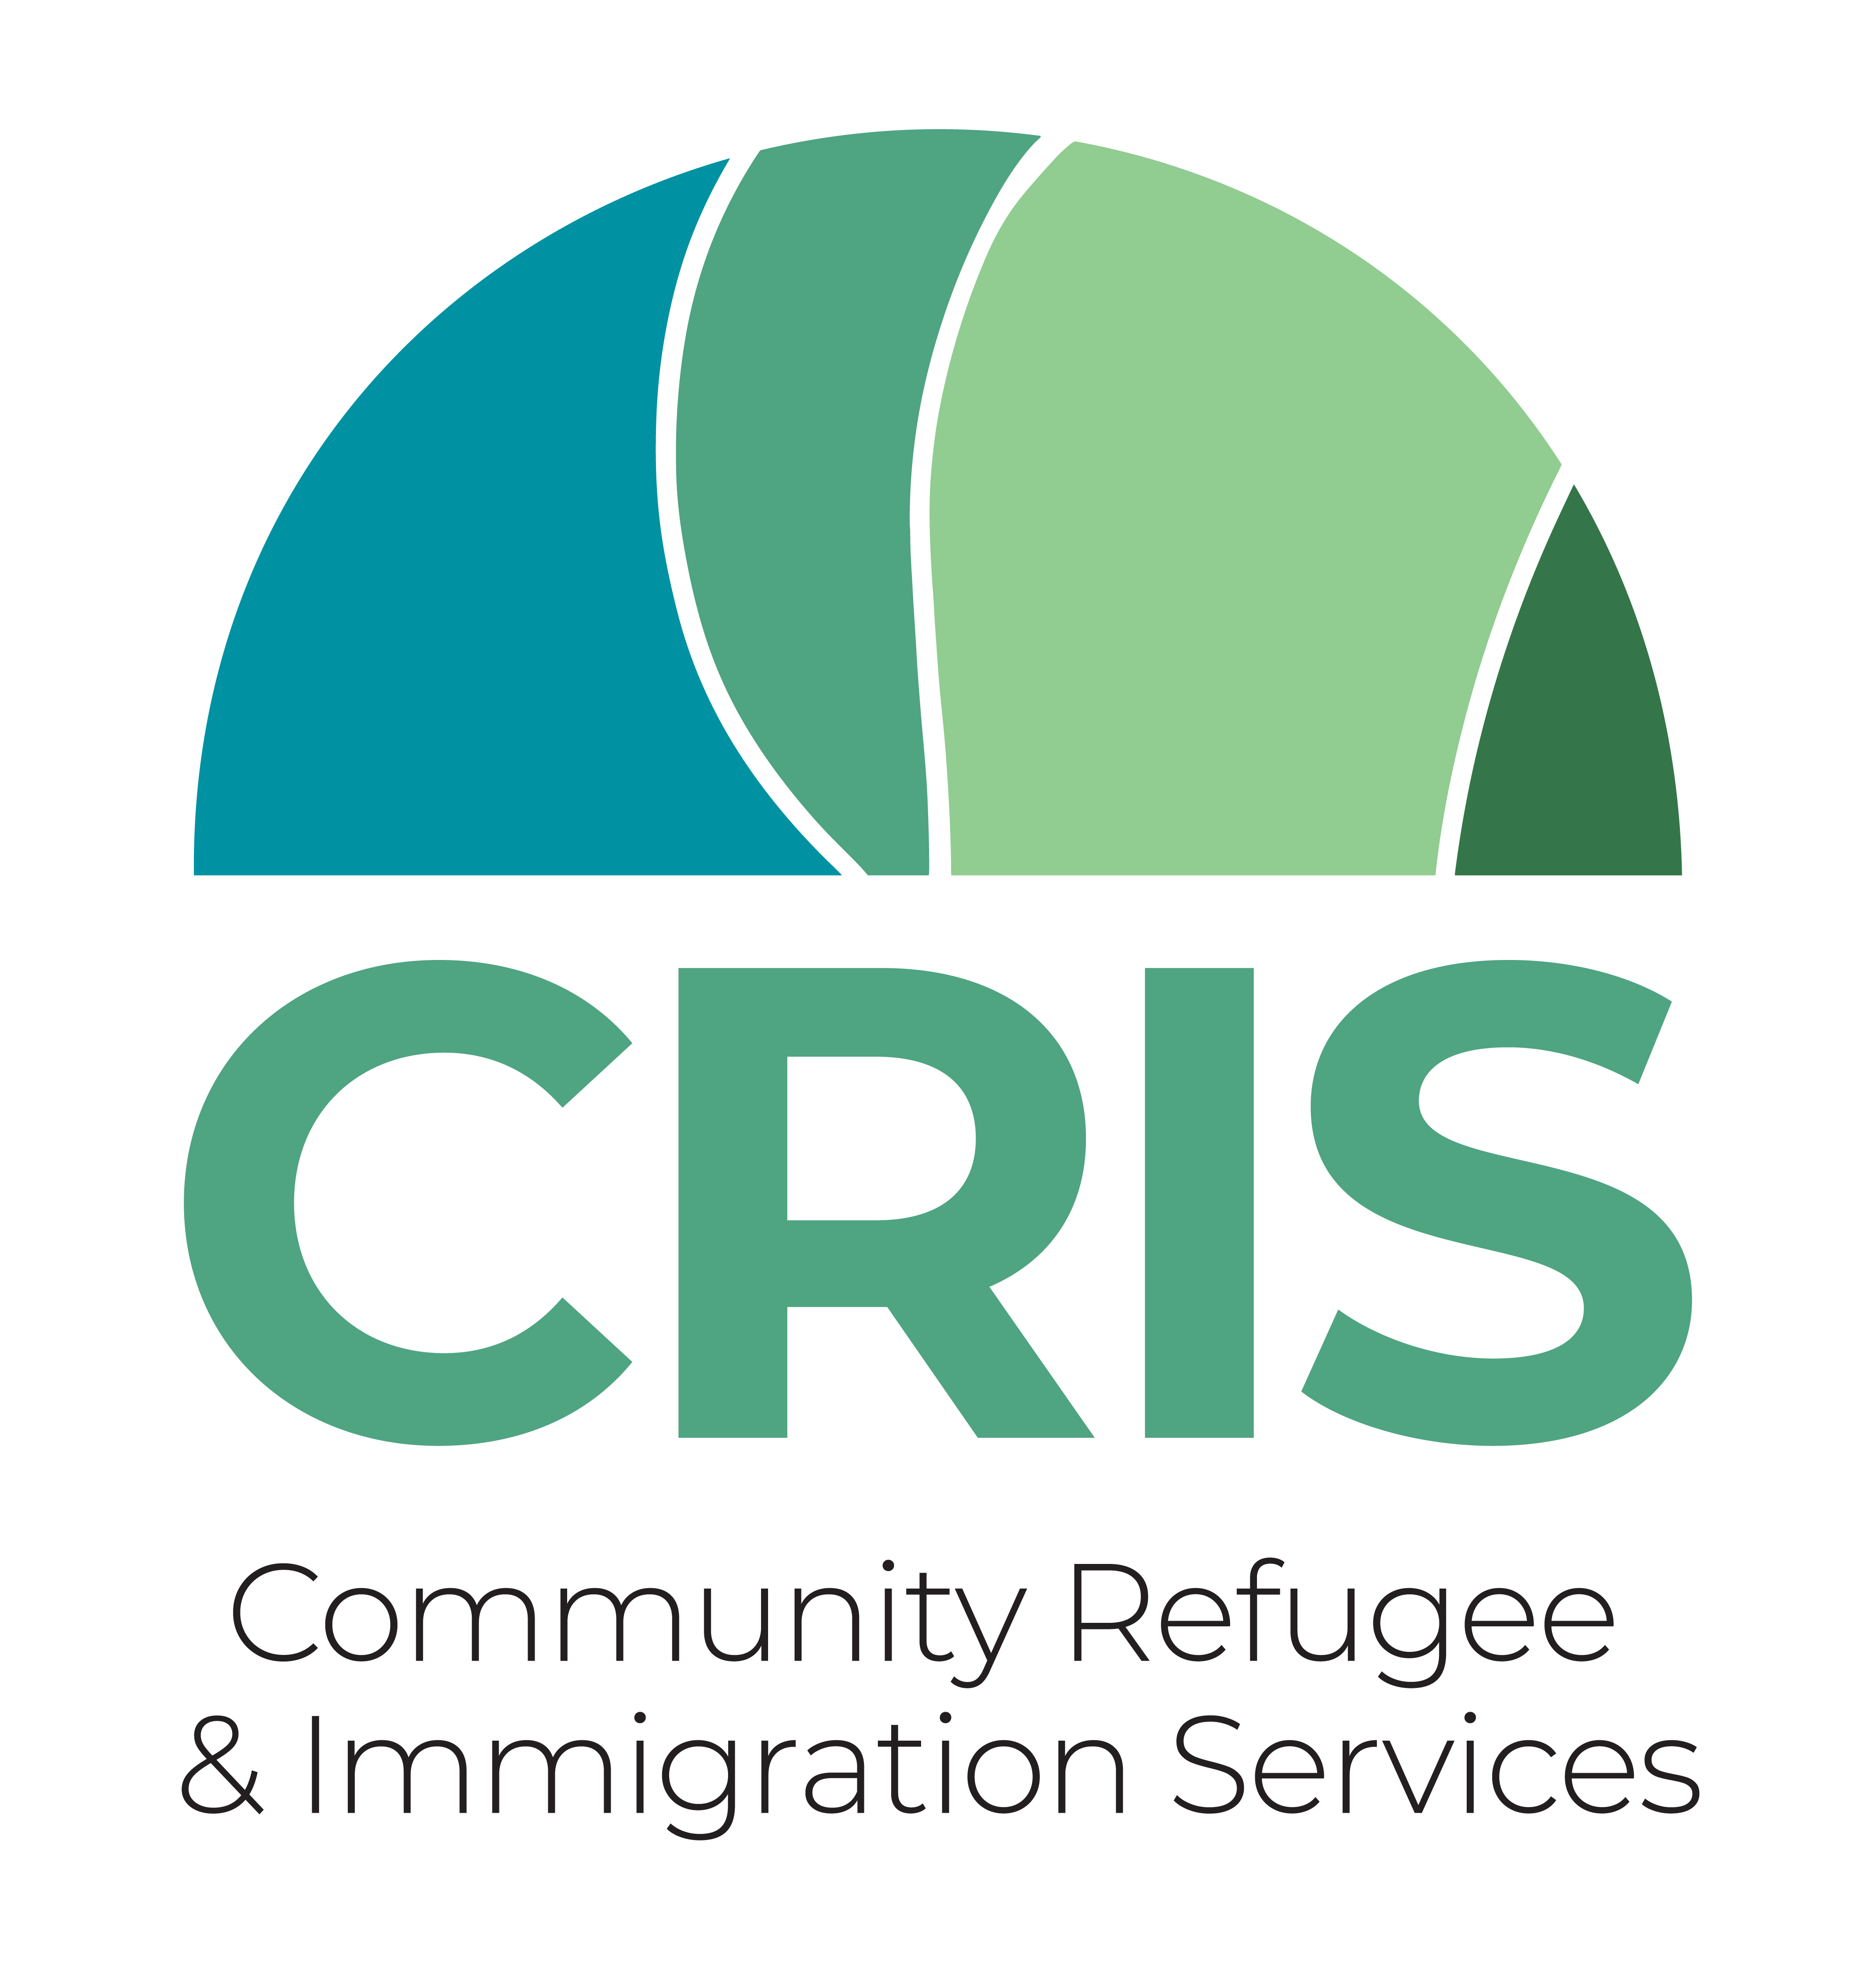 Community Refugee & Immigration Services